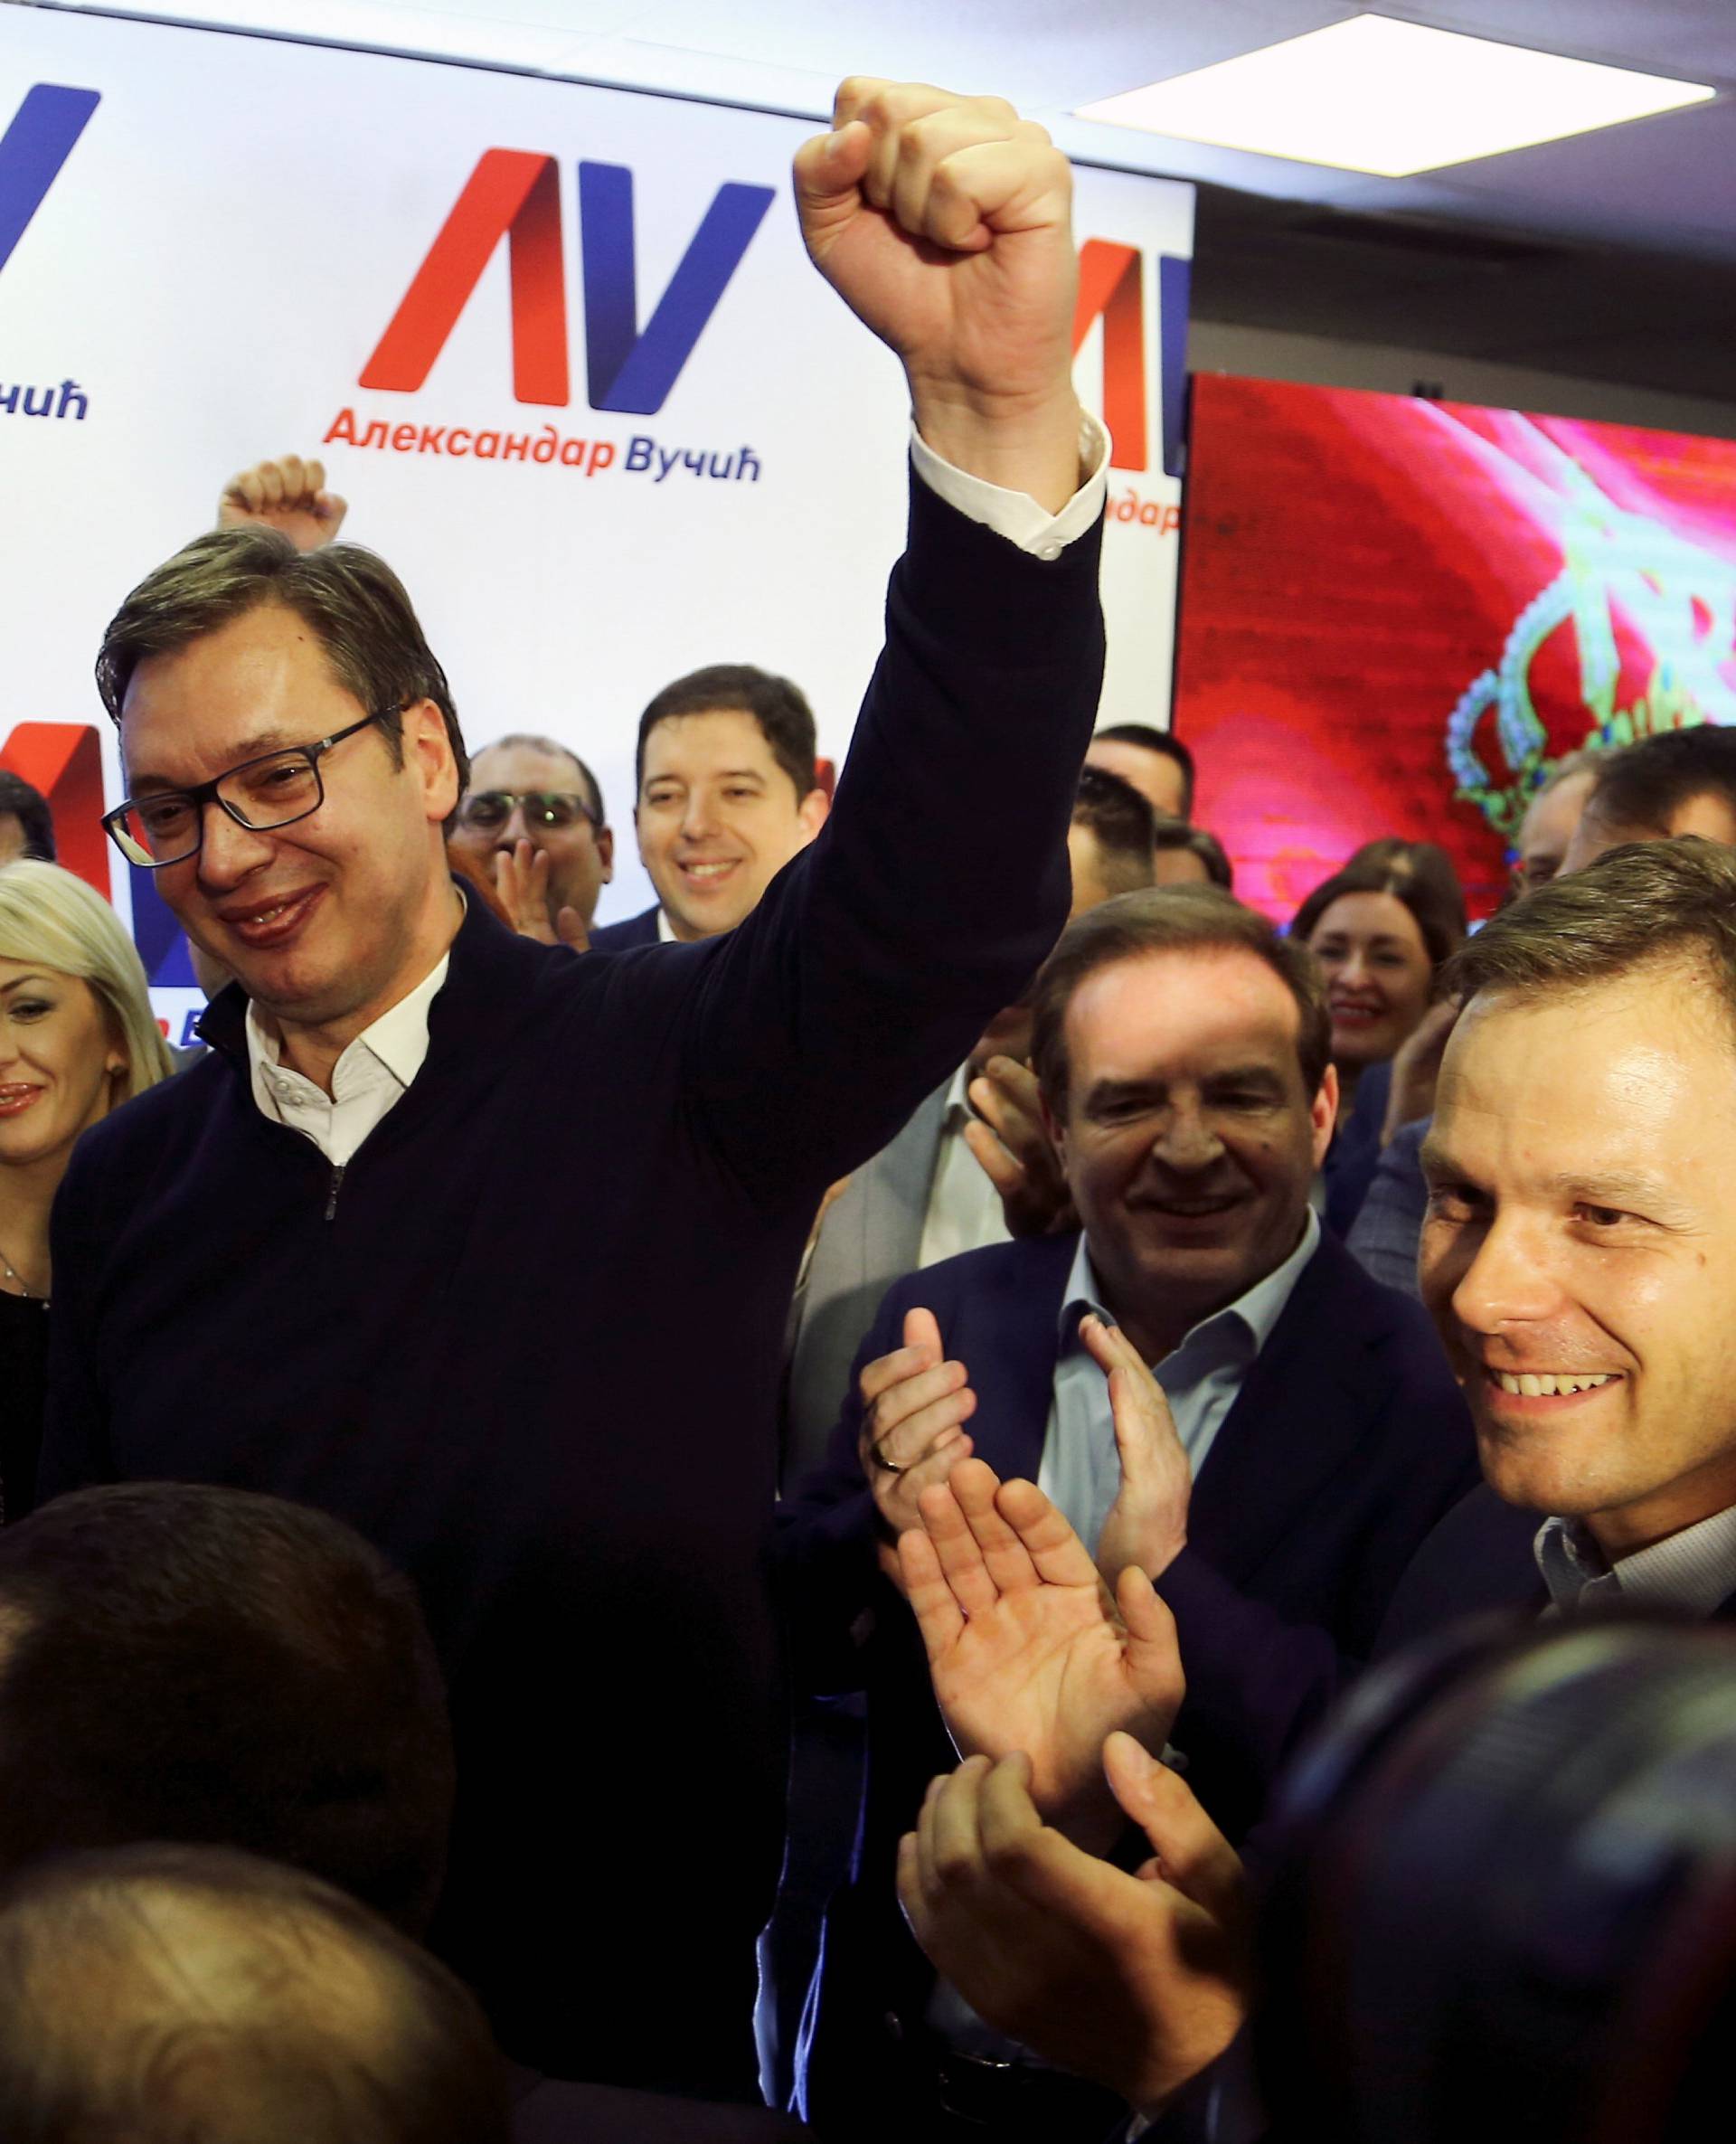 Serbian Prime Minister and presidential candidate Aleksandar Vucic celebrate his win at presidential election in his headquarters in Belgrade